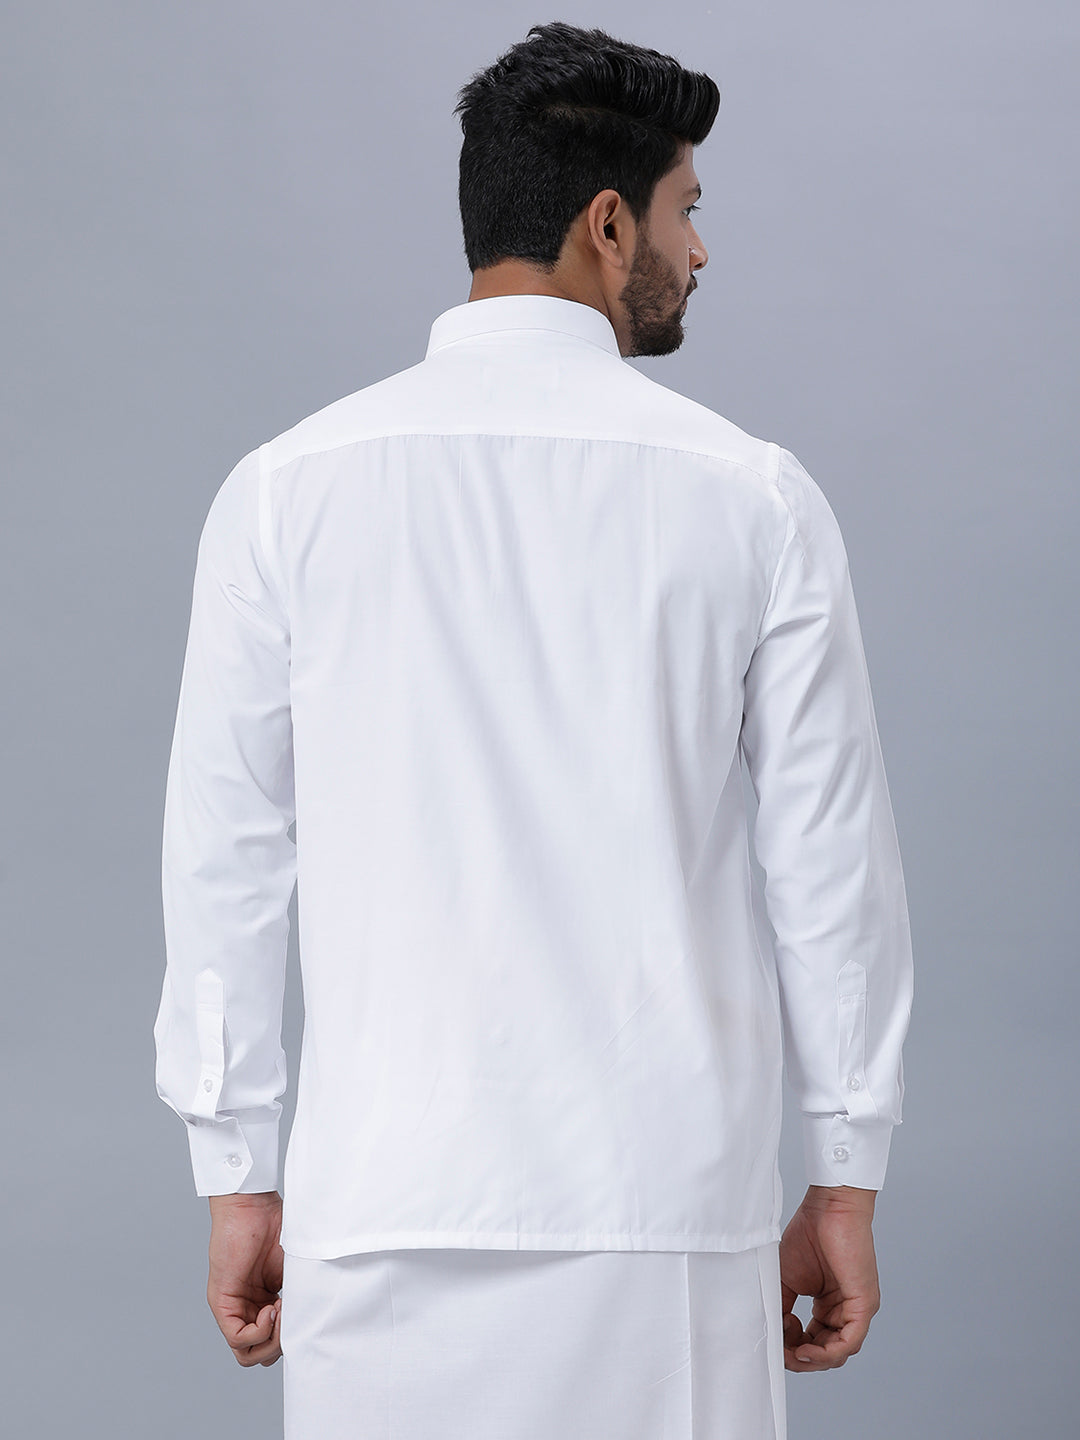 Mens Premium Pure Cotton White Shirt Full Sleeves Ultimate R5-Back view